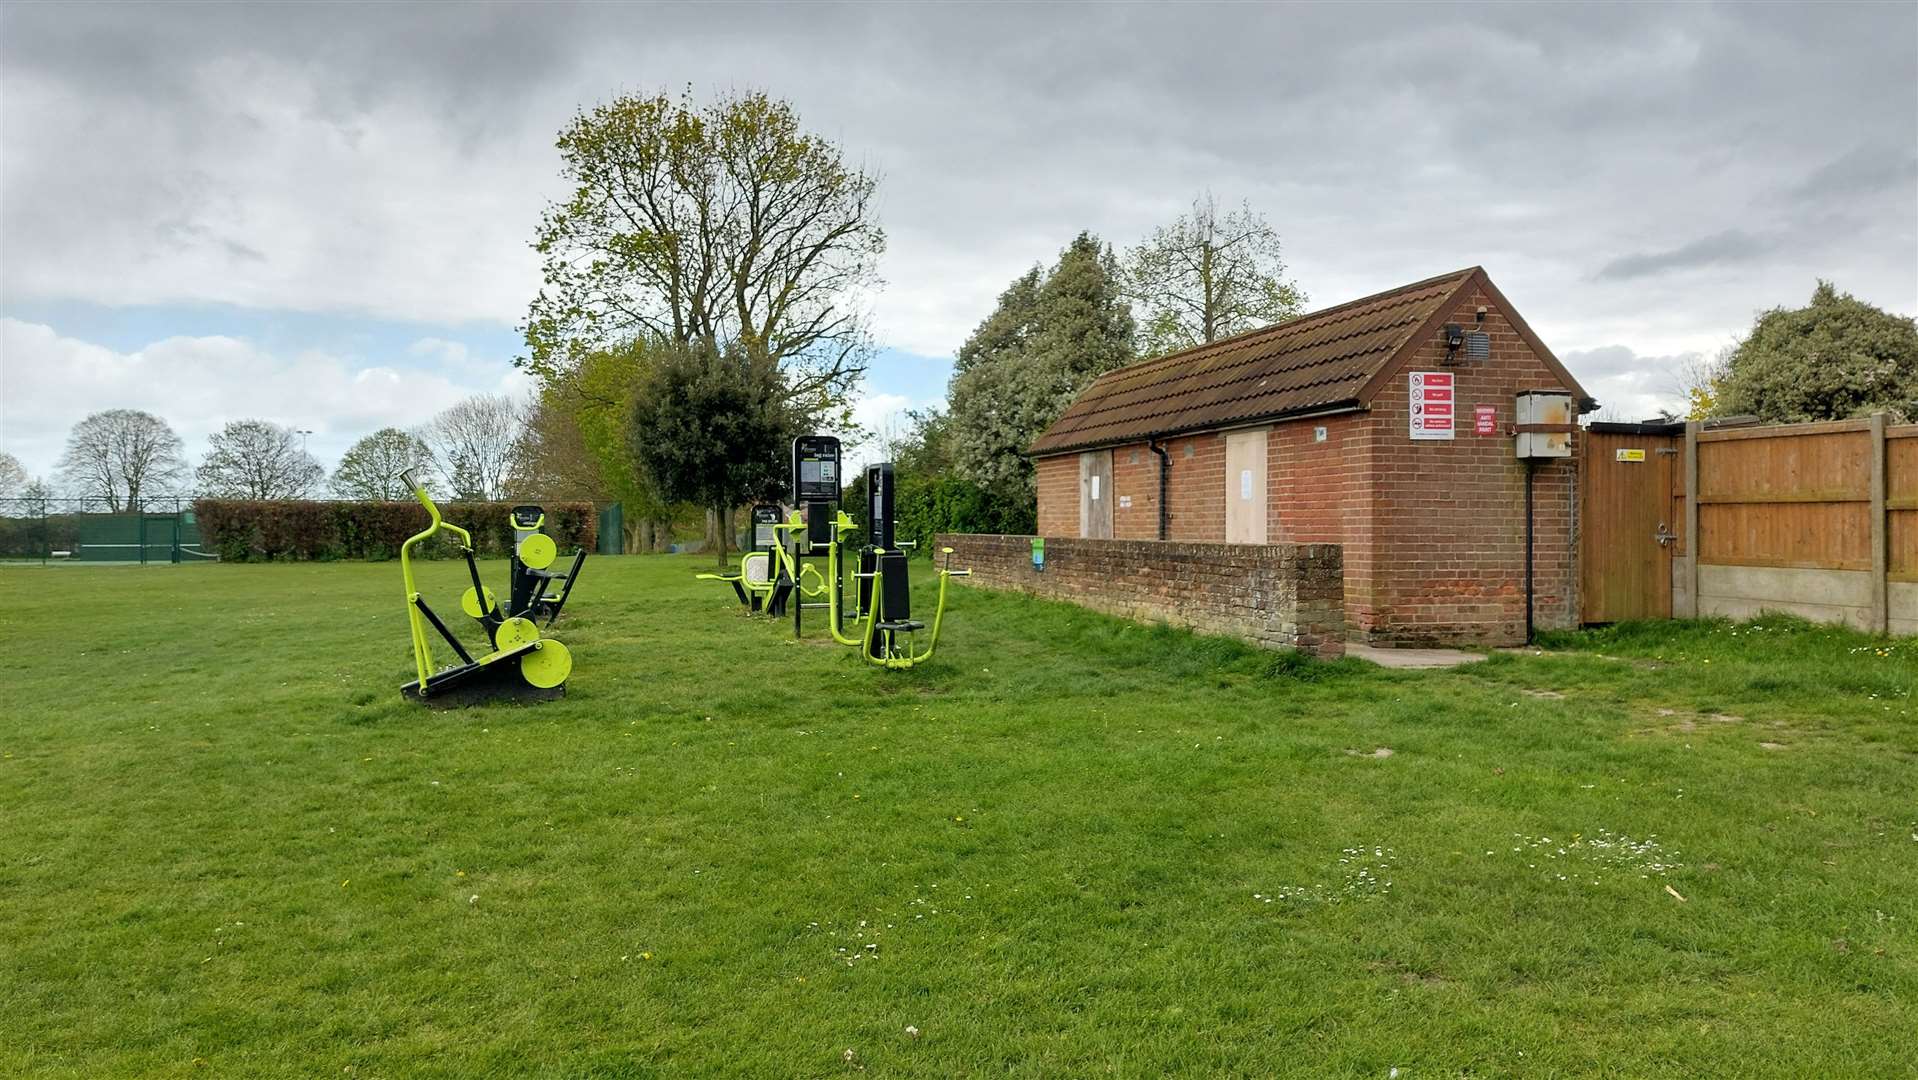 Dog walkers have also seen youths damage the gym equipment at the recreation ground